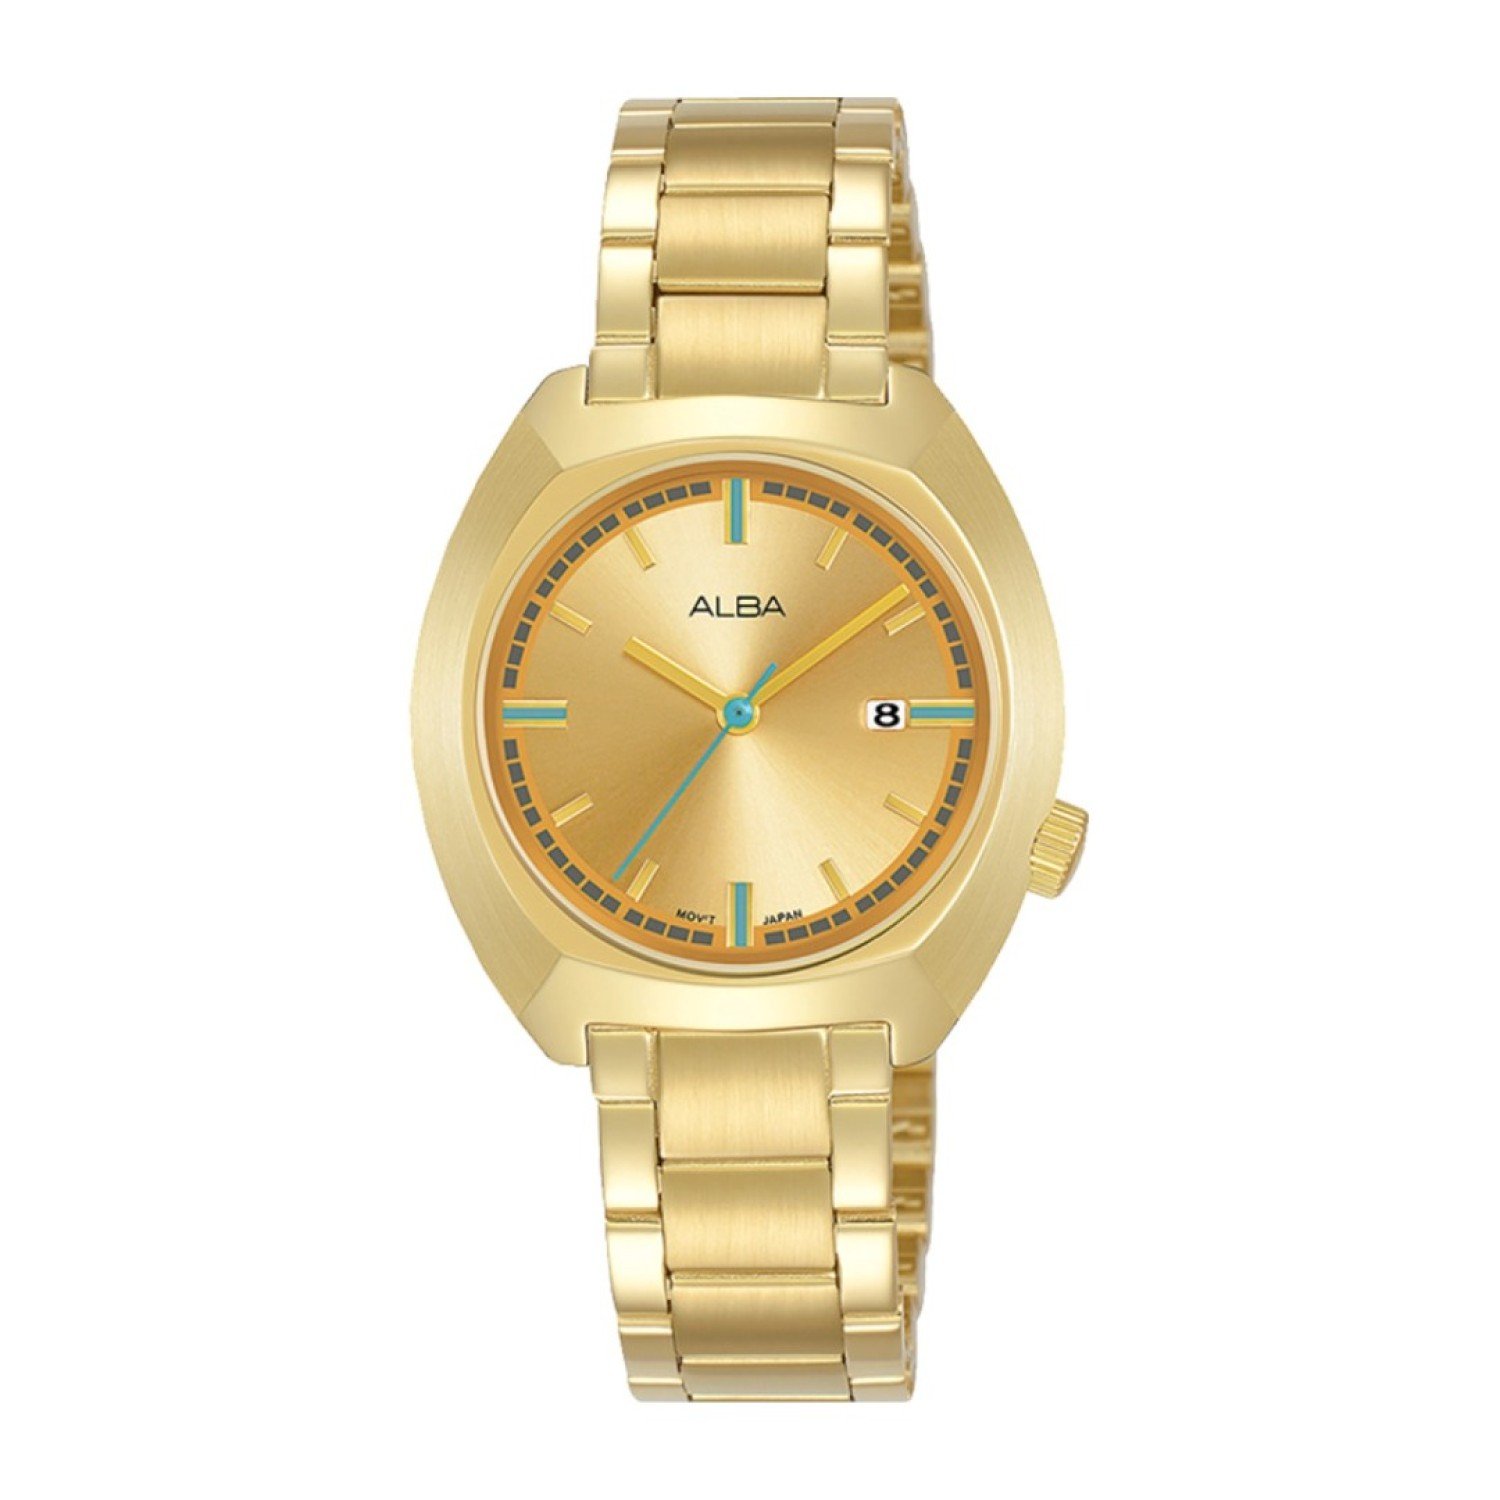 AH7Y34X1 Alba Fusion Womens Gold Stainless Steel Dress Watch. unique engagement rings nz  AH7Y34X1 Alba Fusion Womens Gold Stainless Steel Dress Watch   Afterpay - Split your purchase into four instalments - Pay for your purchase over four instalments, du